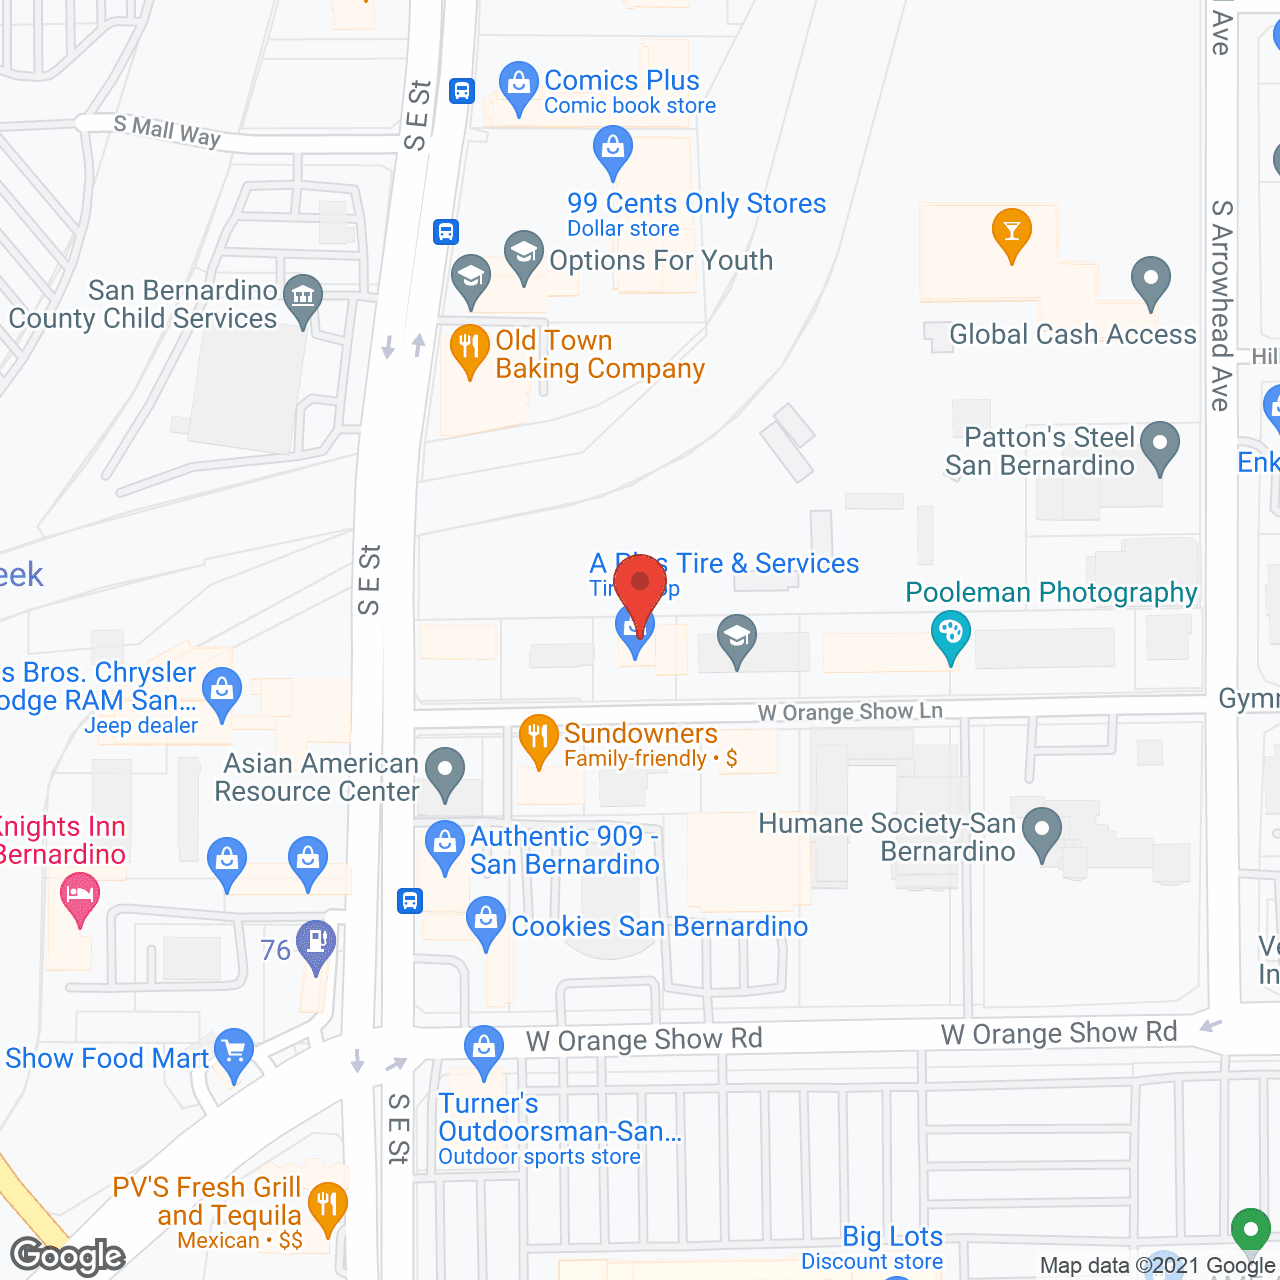 St Johns Home Care Registry in google map